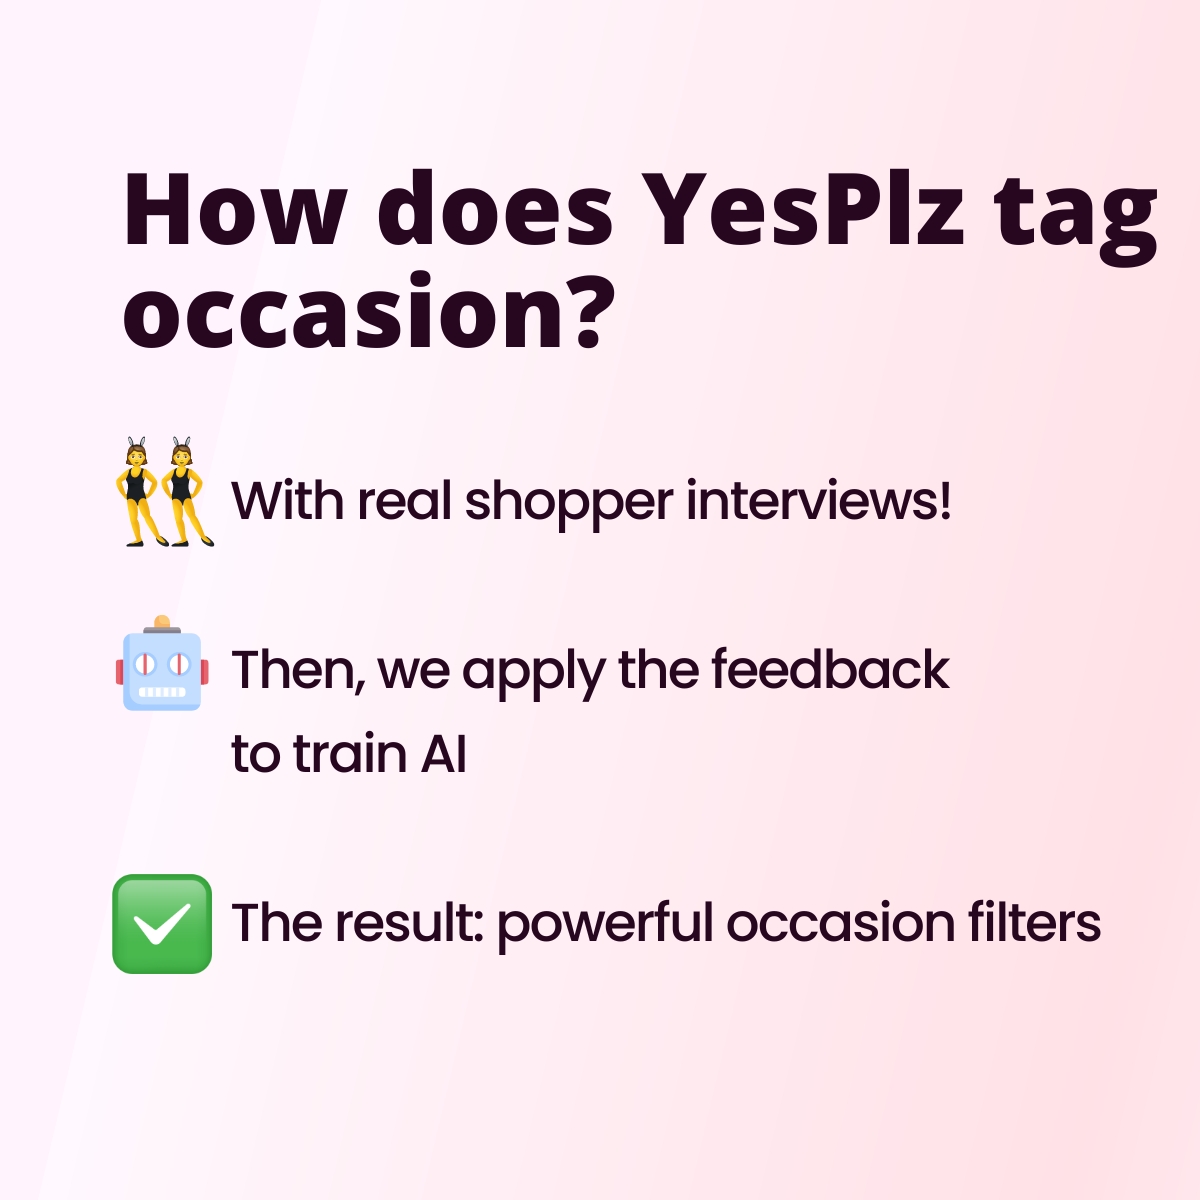 YesPlz occasion tagging explanation against a gradient background